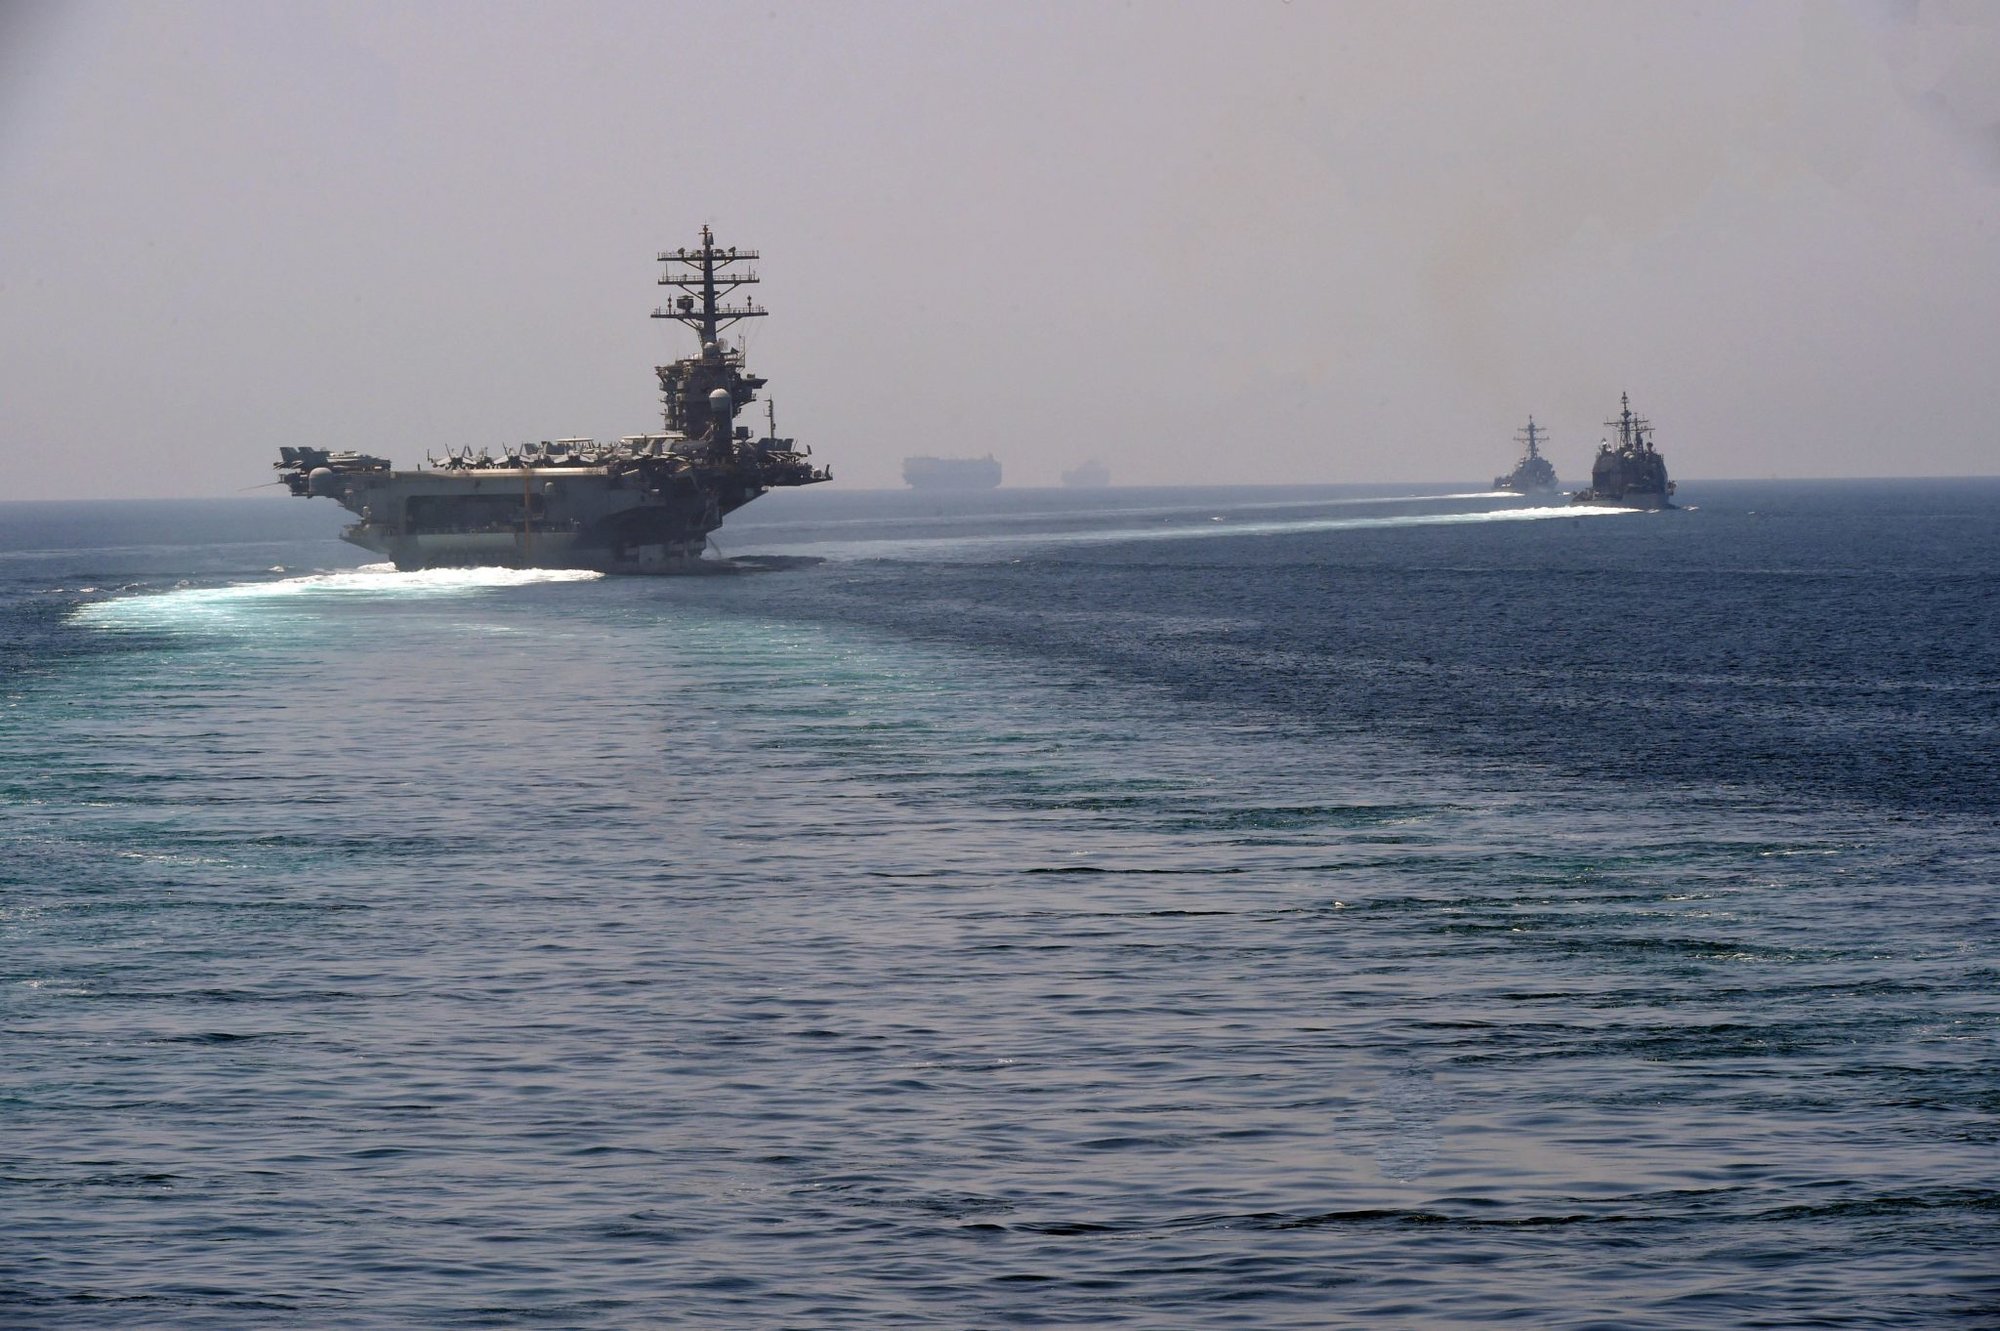 STRAIT OF HORMUZ (Sep. 18, 2020) The aircraft carrier USS Nimitz (CVN 68), guided-missile cruiser USS Princeton (CG 59) and guided-missile destroyer USS Sterett (DDG 104) steam in formation during a Strait of Hormuz transit, Sept. 18. U.S. Navy photo by Mass Communication Specialist 2nd Class Indra Beaufort.